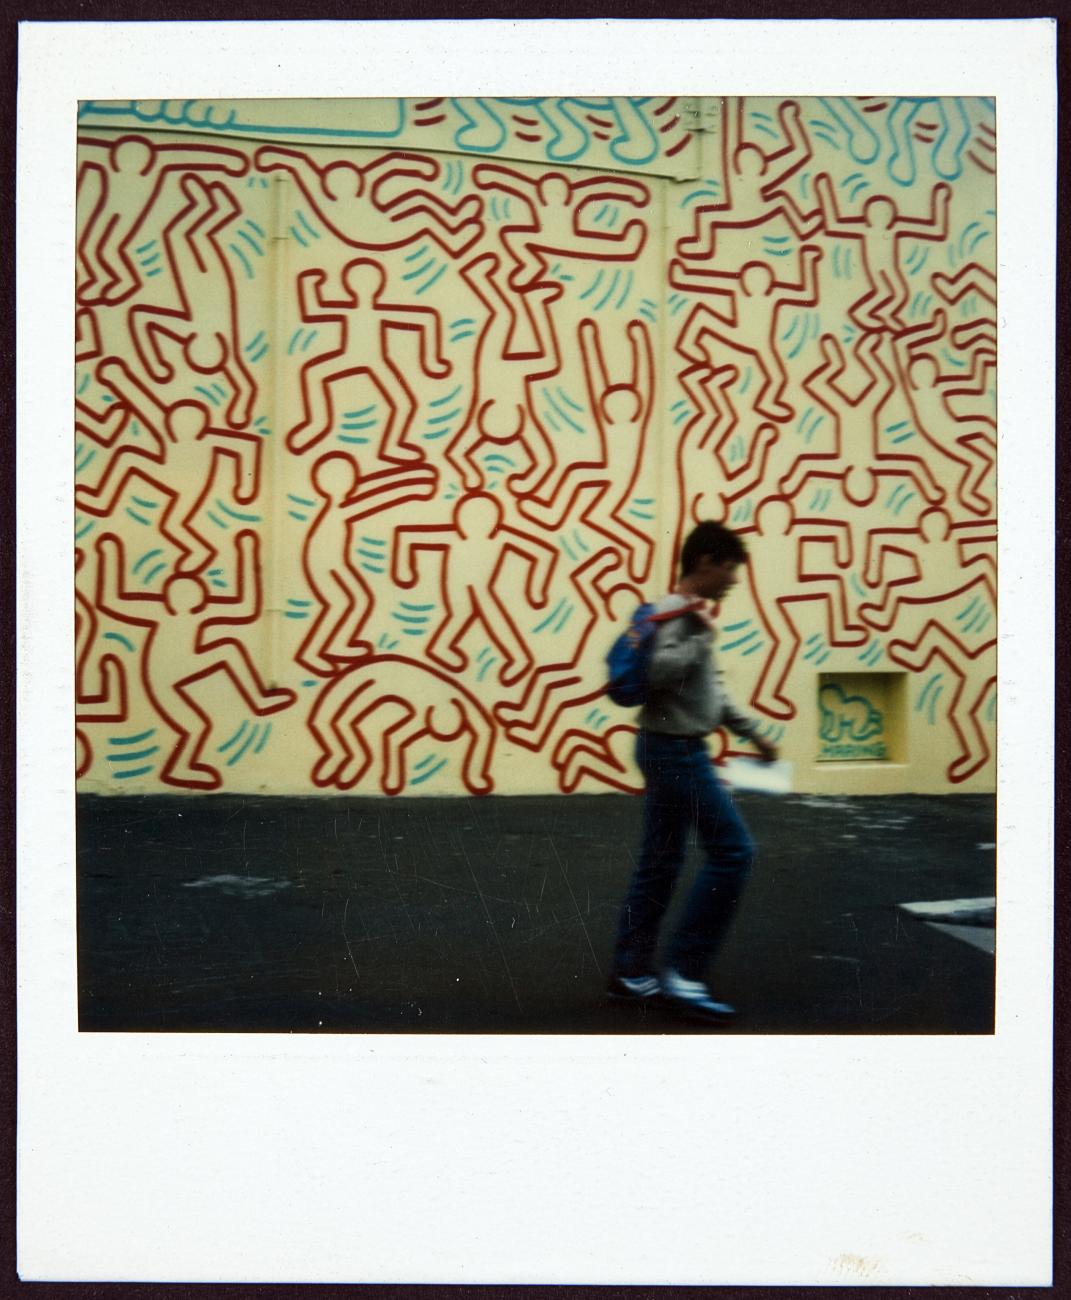 Lina Bradford on living herstory and Keith Haring